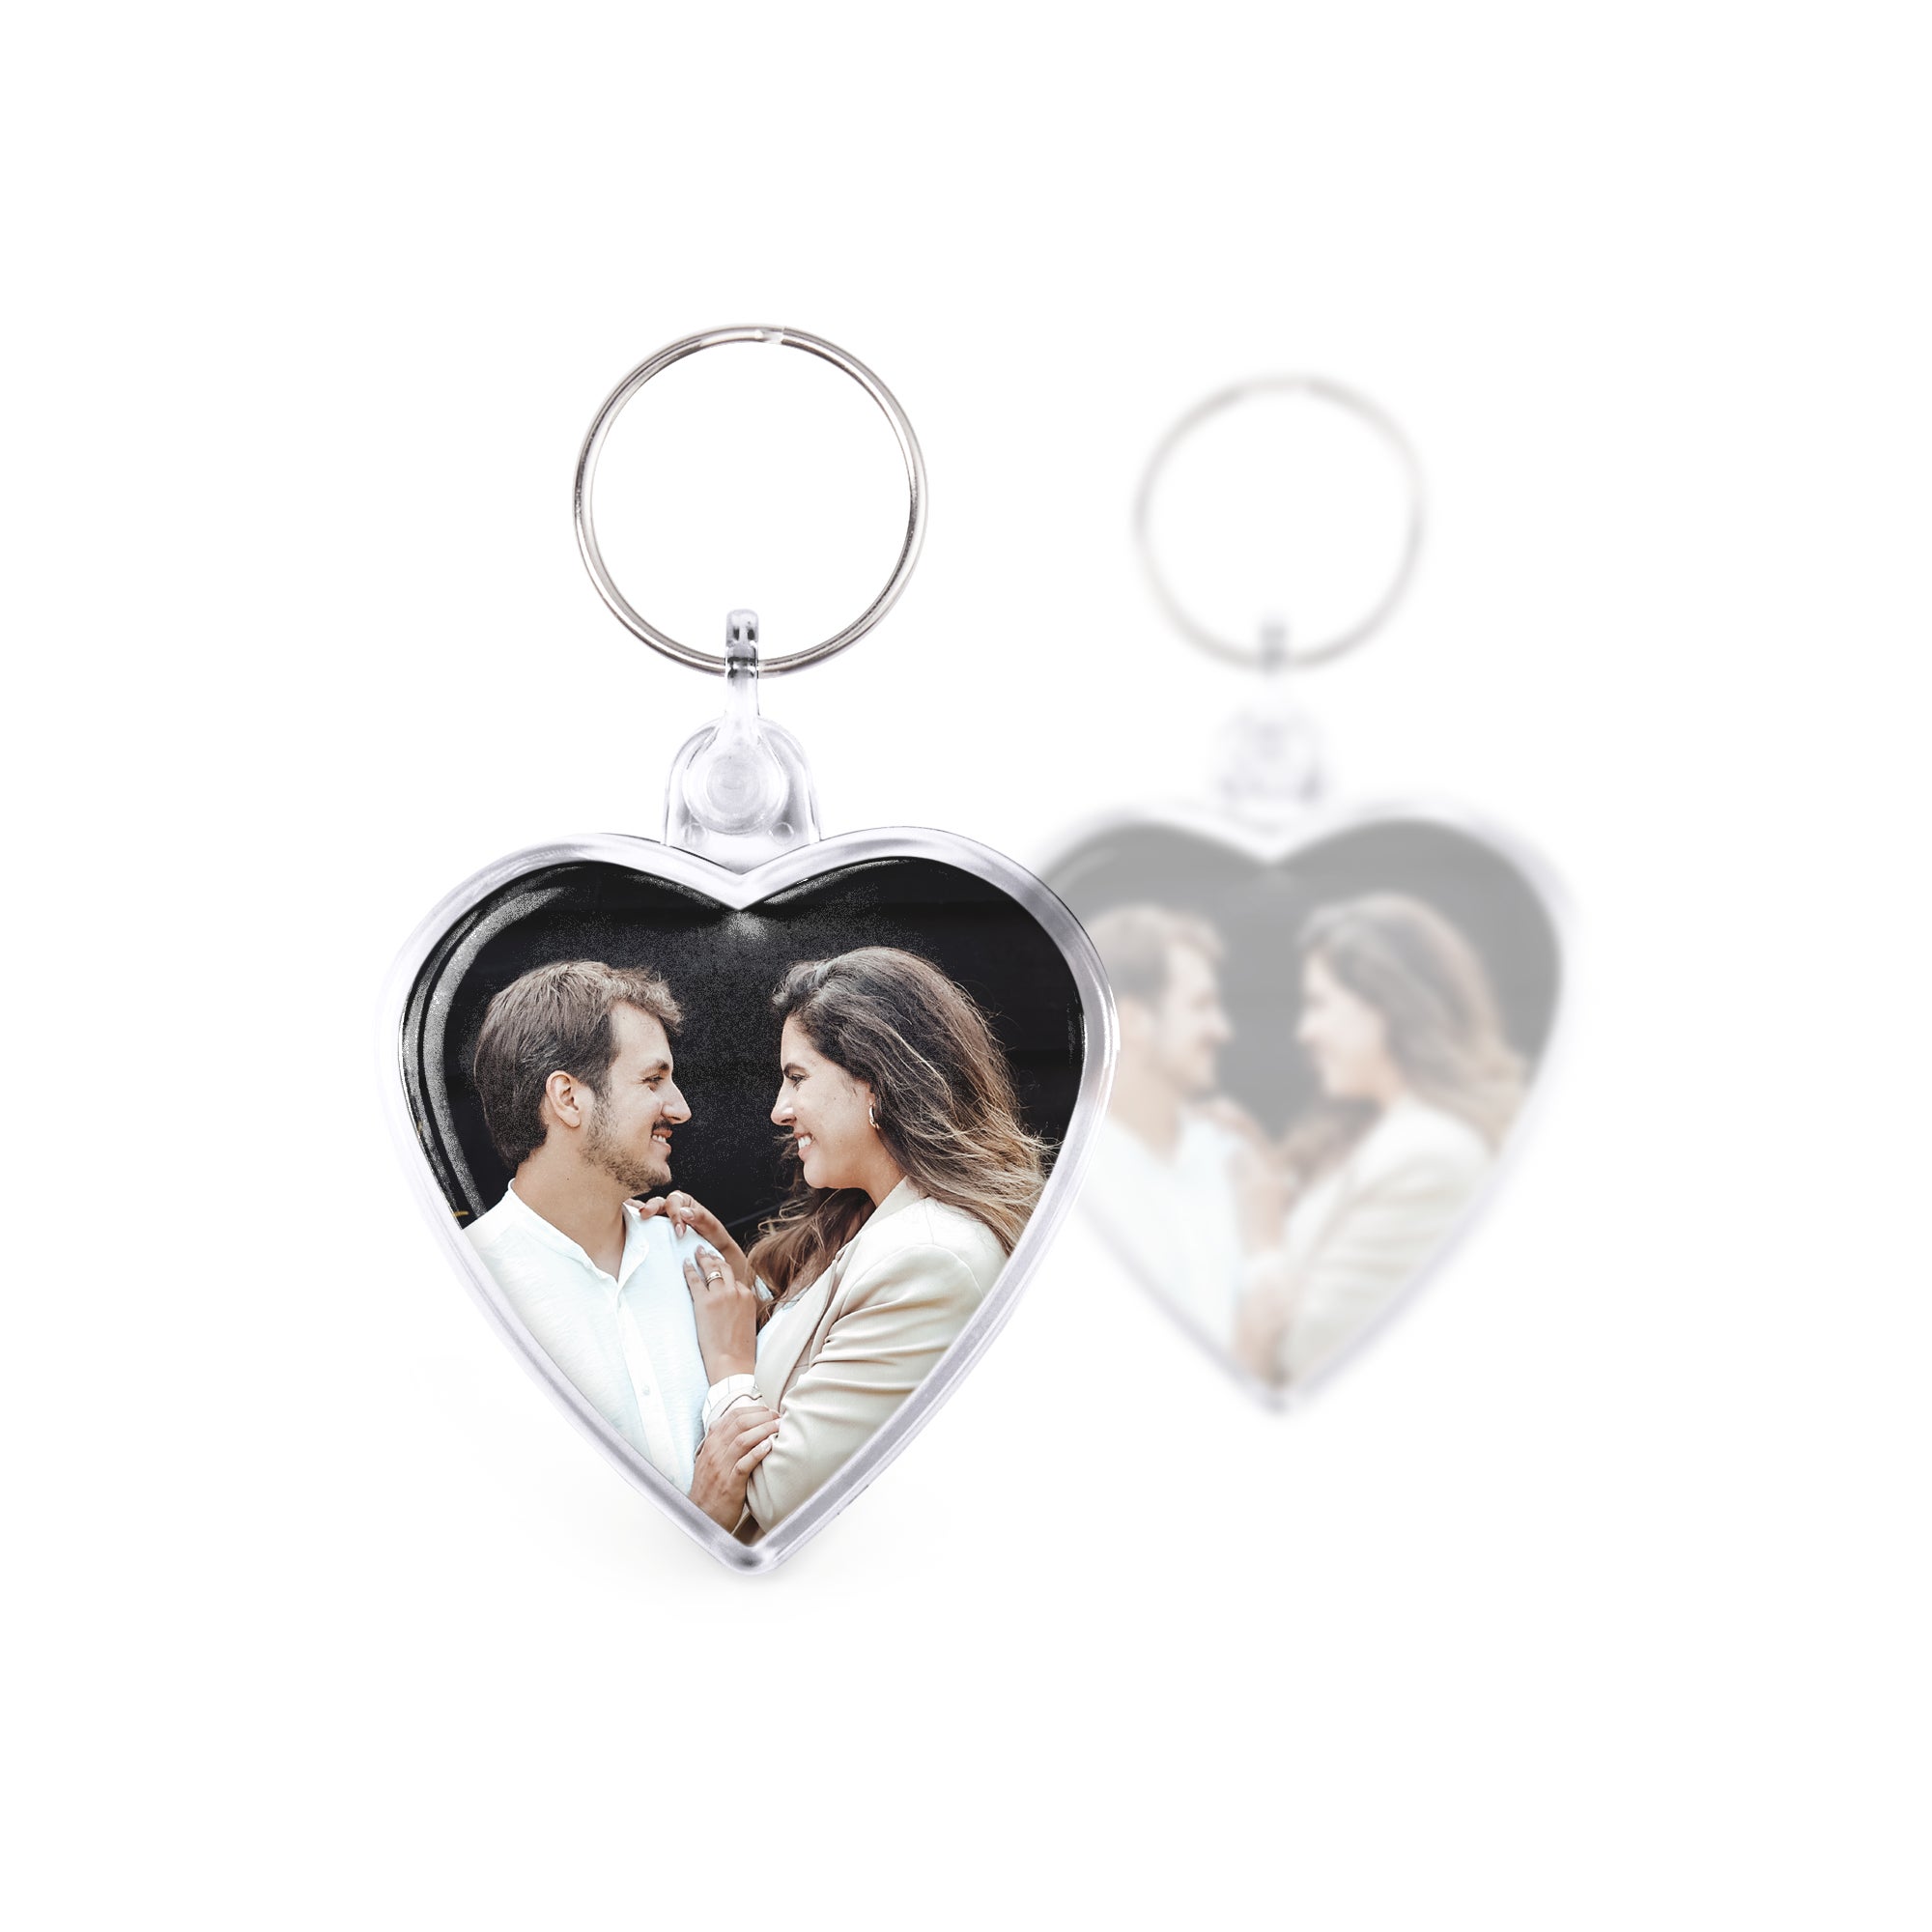 Personalised key ring - Heart - Double-sided